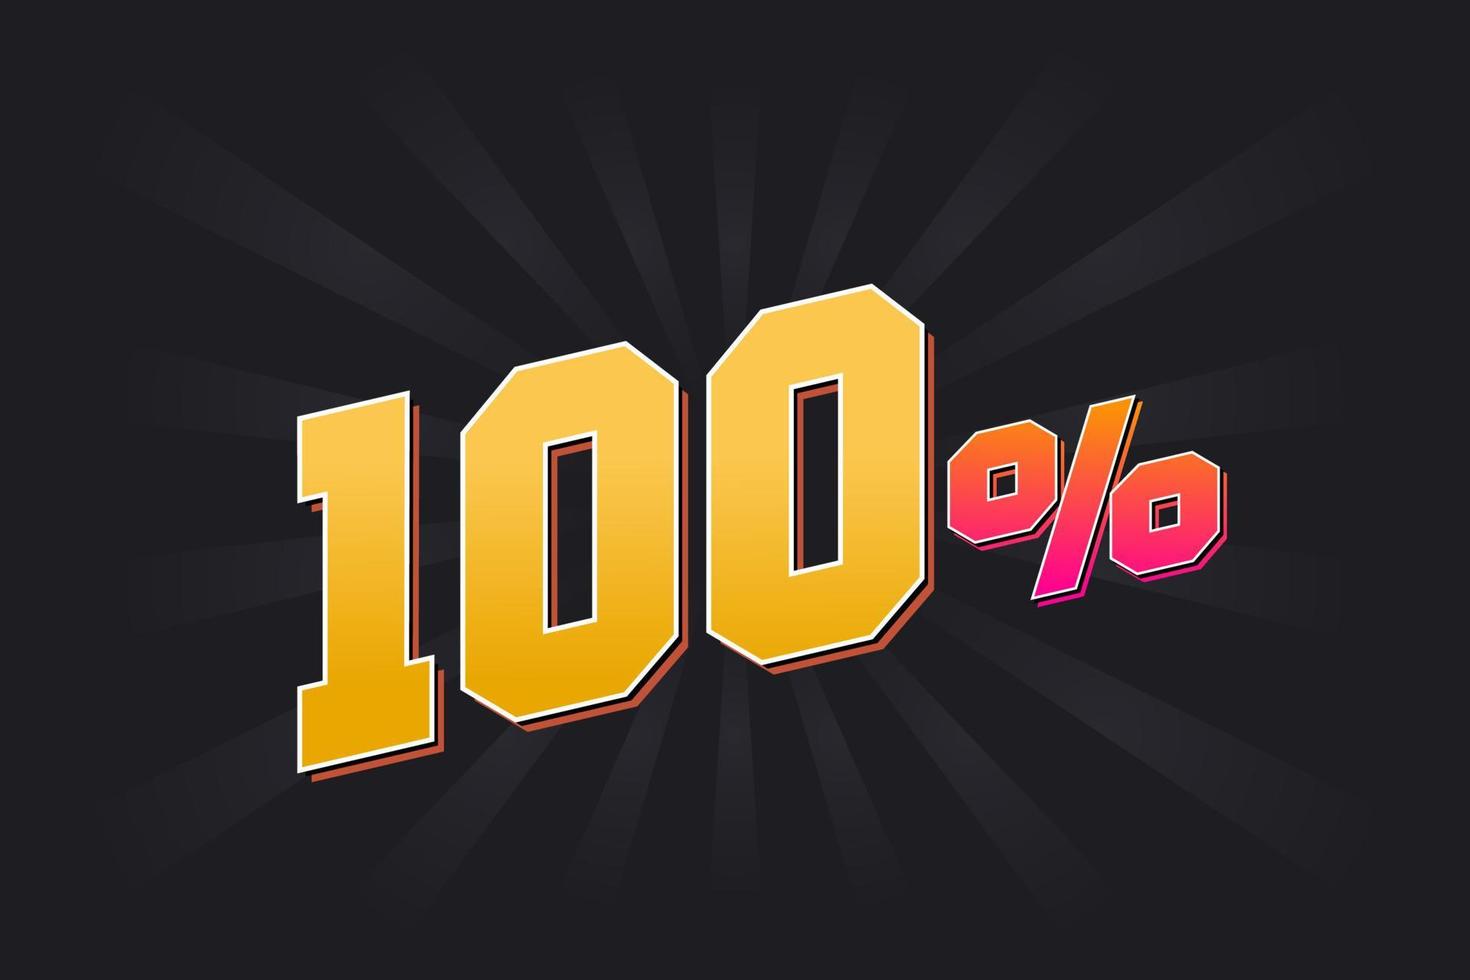 100 discount banner with dark background and yellow text. 100 percent sales promotional design. vector